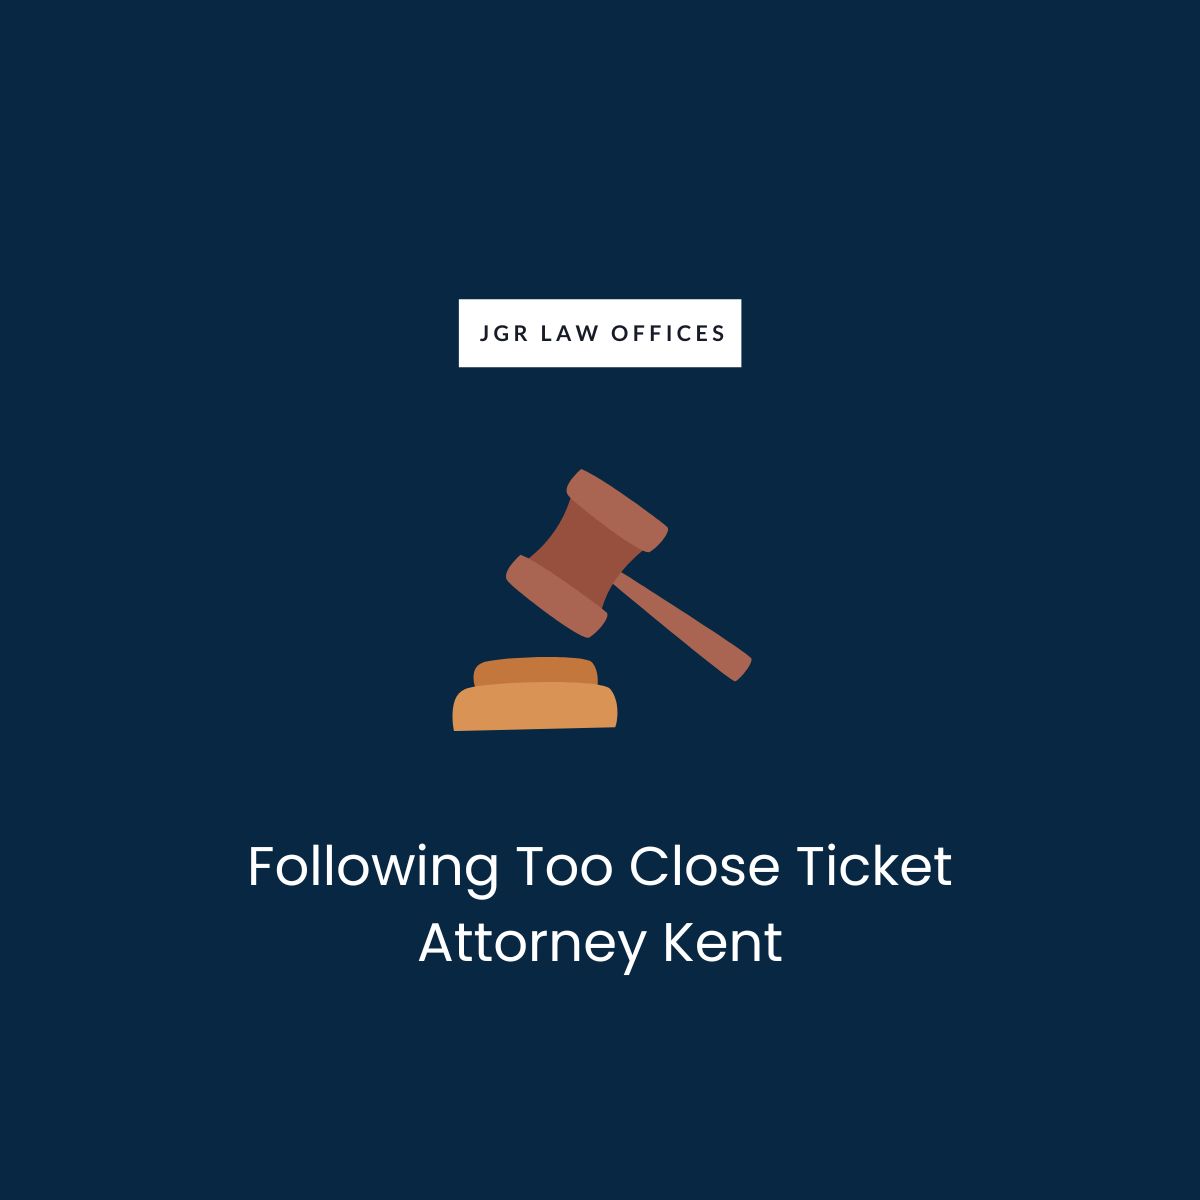 Following Too Close Ticket Attorney Kent